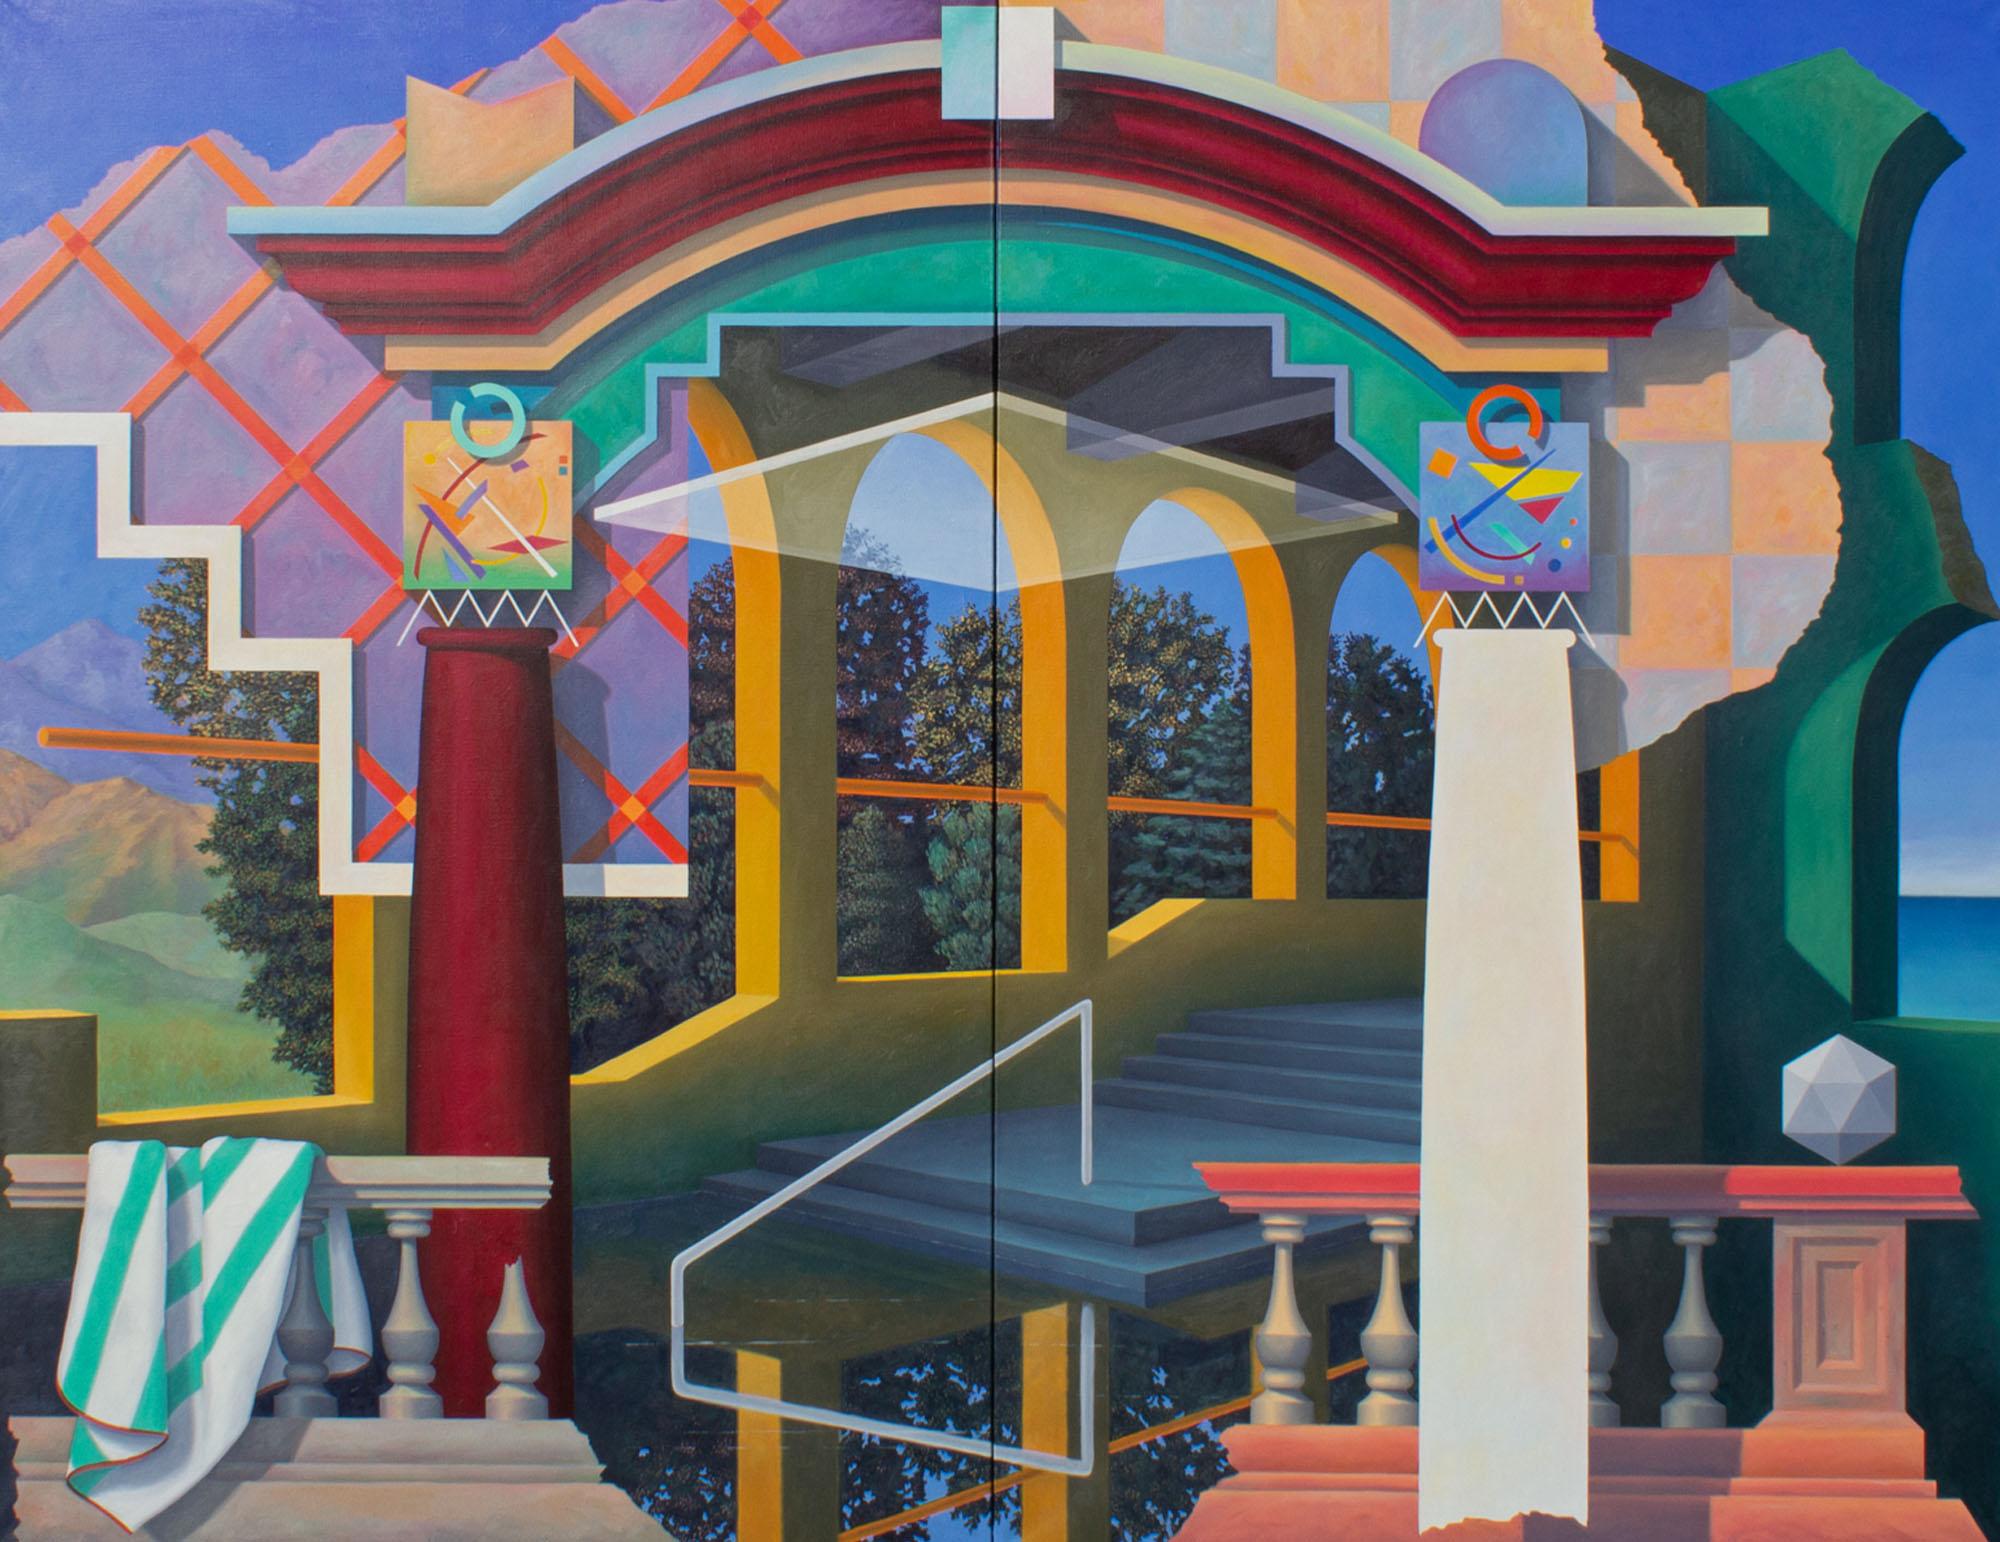 A 1992 monumental acrylic on canvas diptych painting by the American artist Kim Krause. Painted on two panels and titled Kepler/Paradox #4, this Postmodern work depicts a vibrant array of arches, stairs, banisters, railings, and other architectural